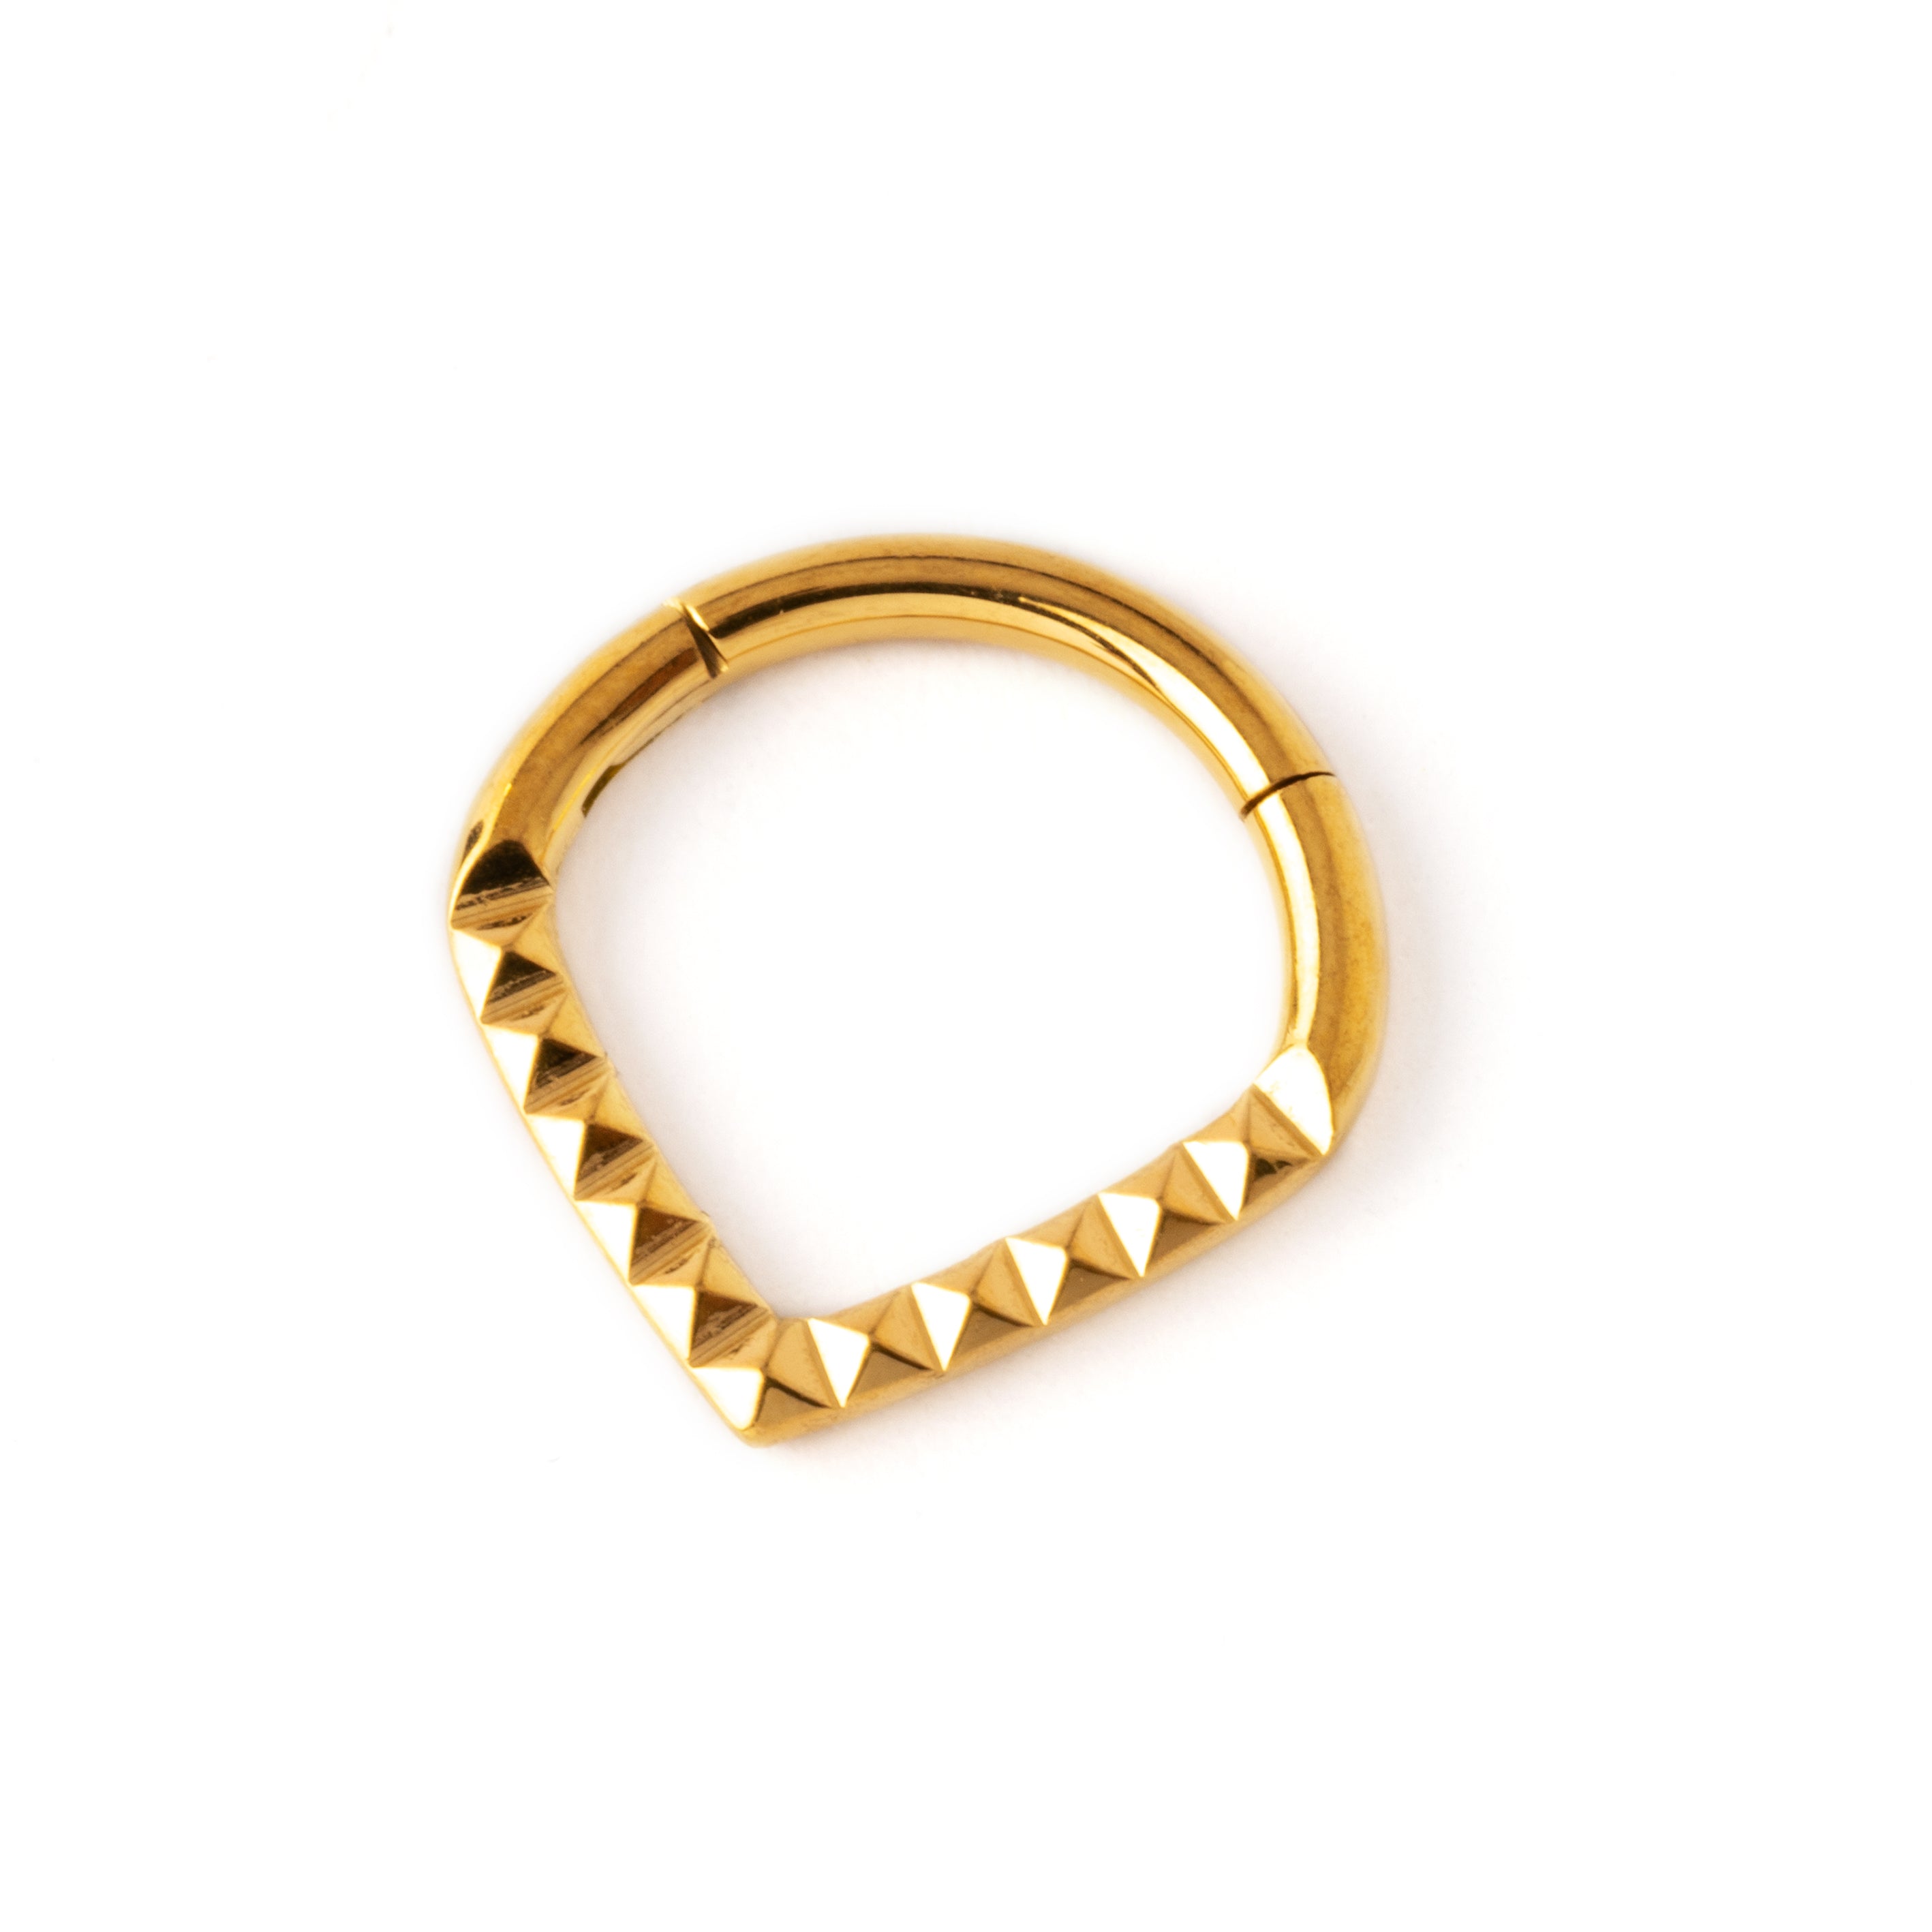 Giza gold surgical steel teardrop shaped septum clicker right side view